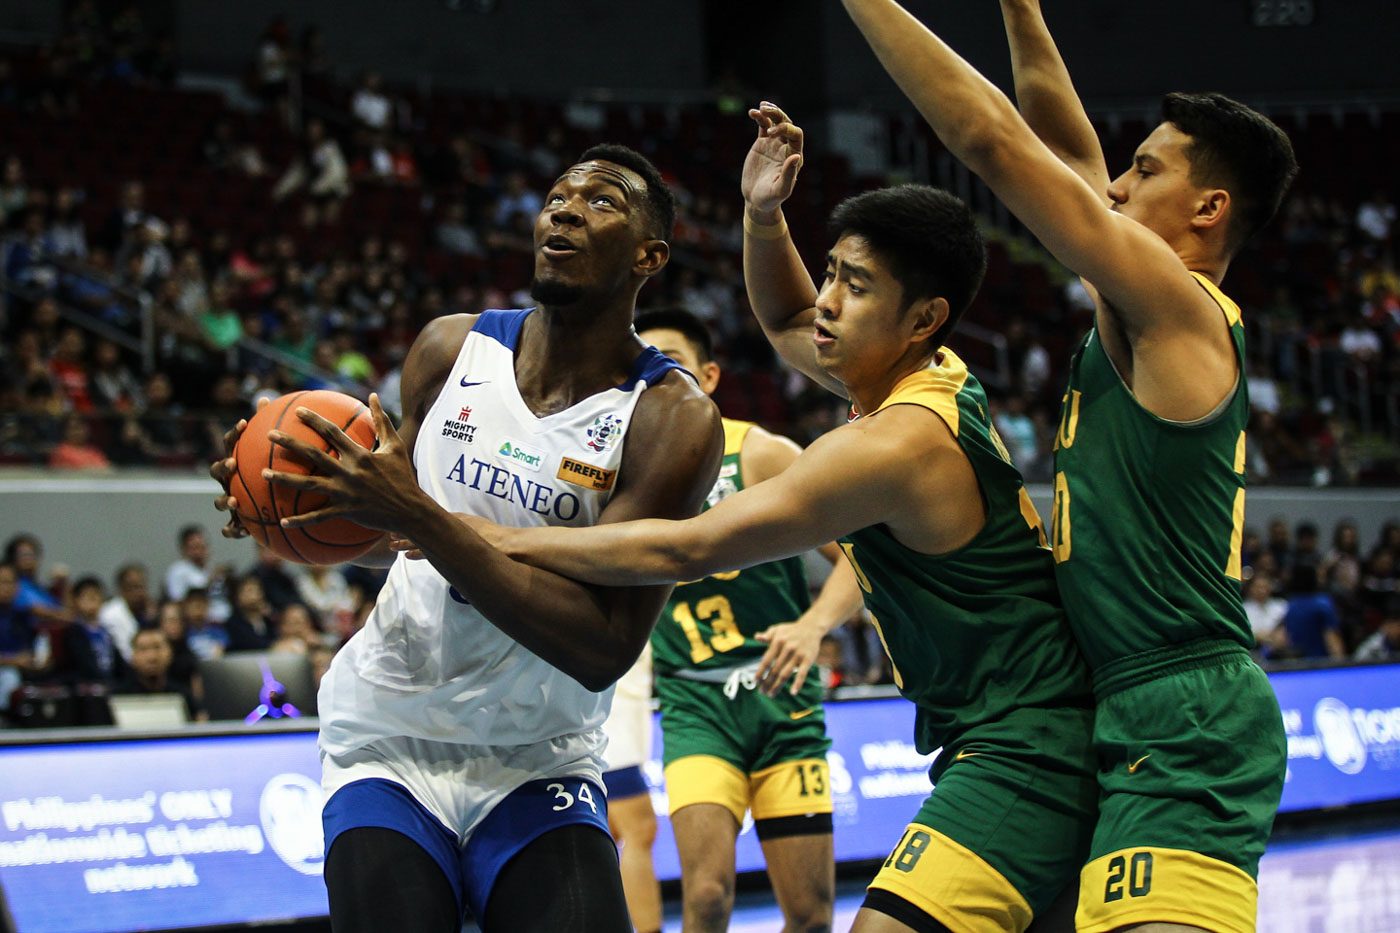 Helping keep Ateneo spotless, Kouame earns UAAP Player of the Week nod